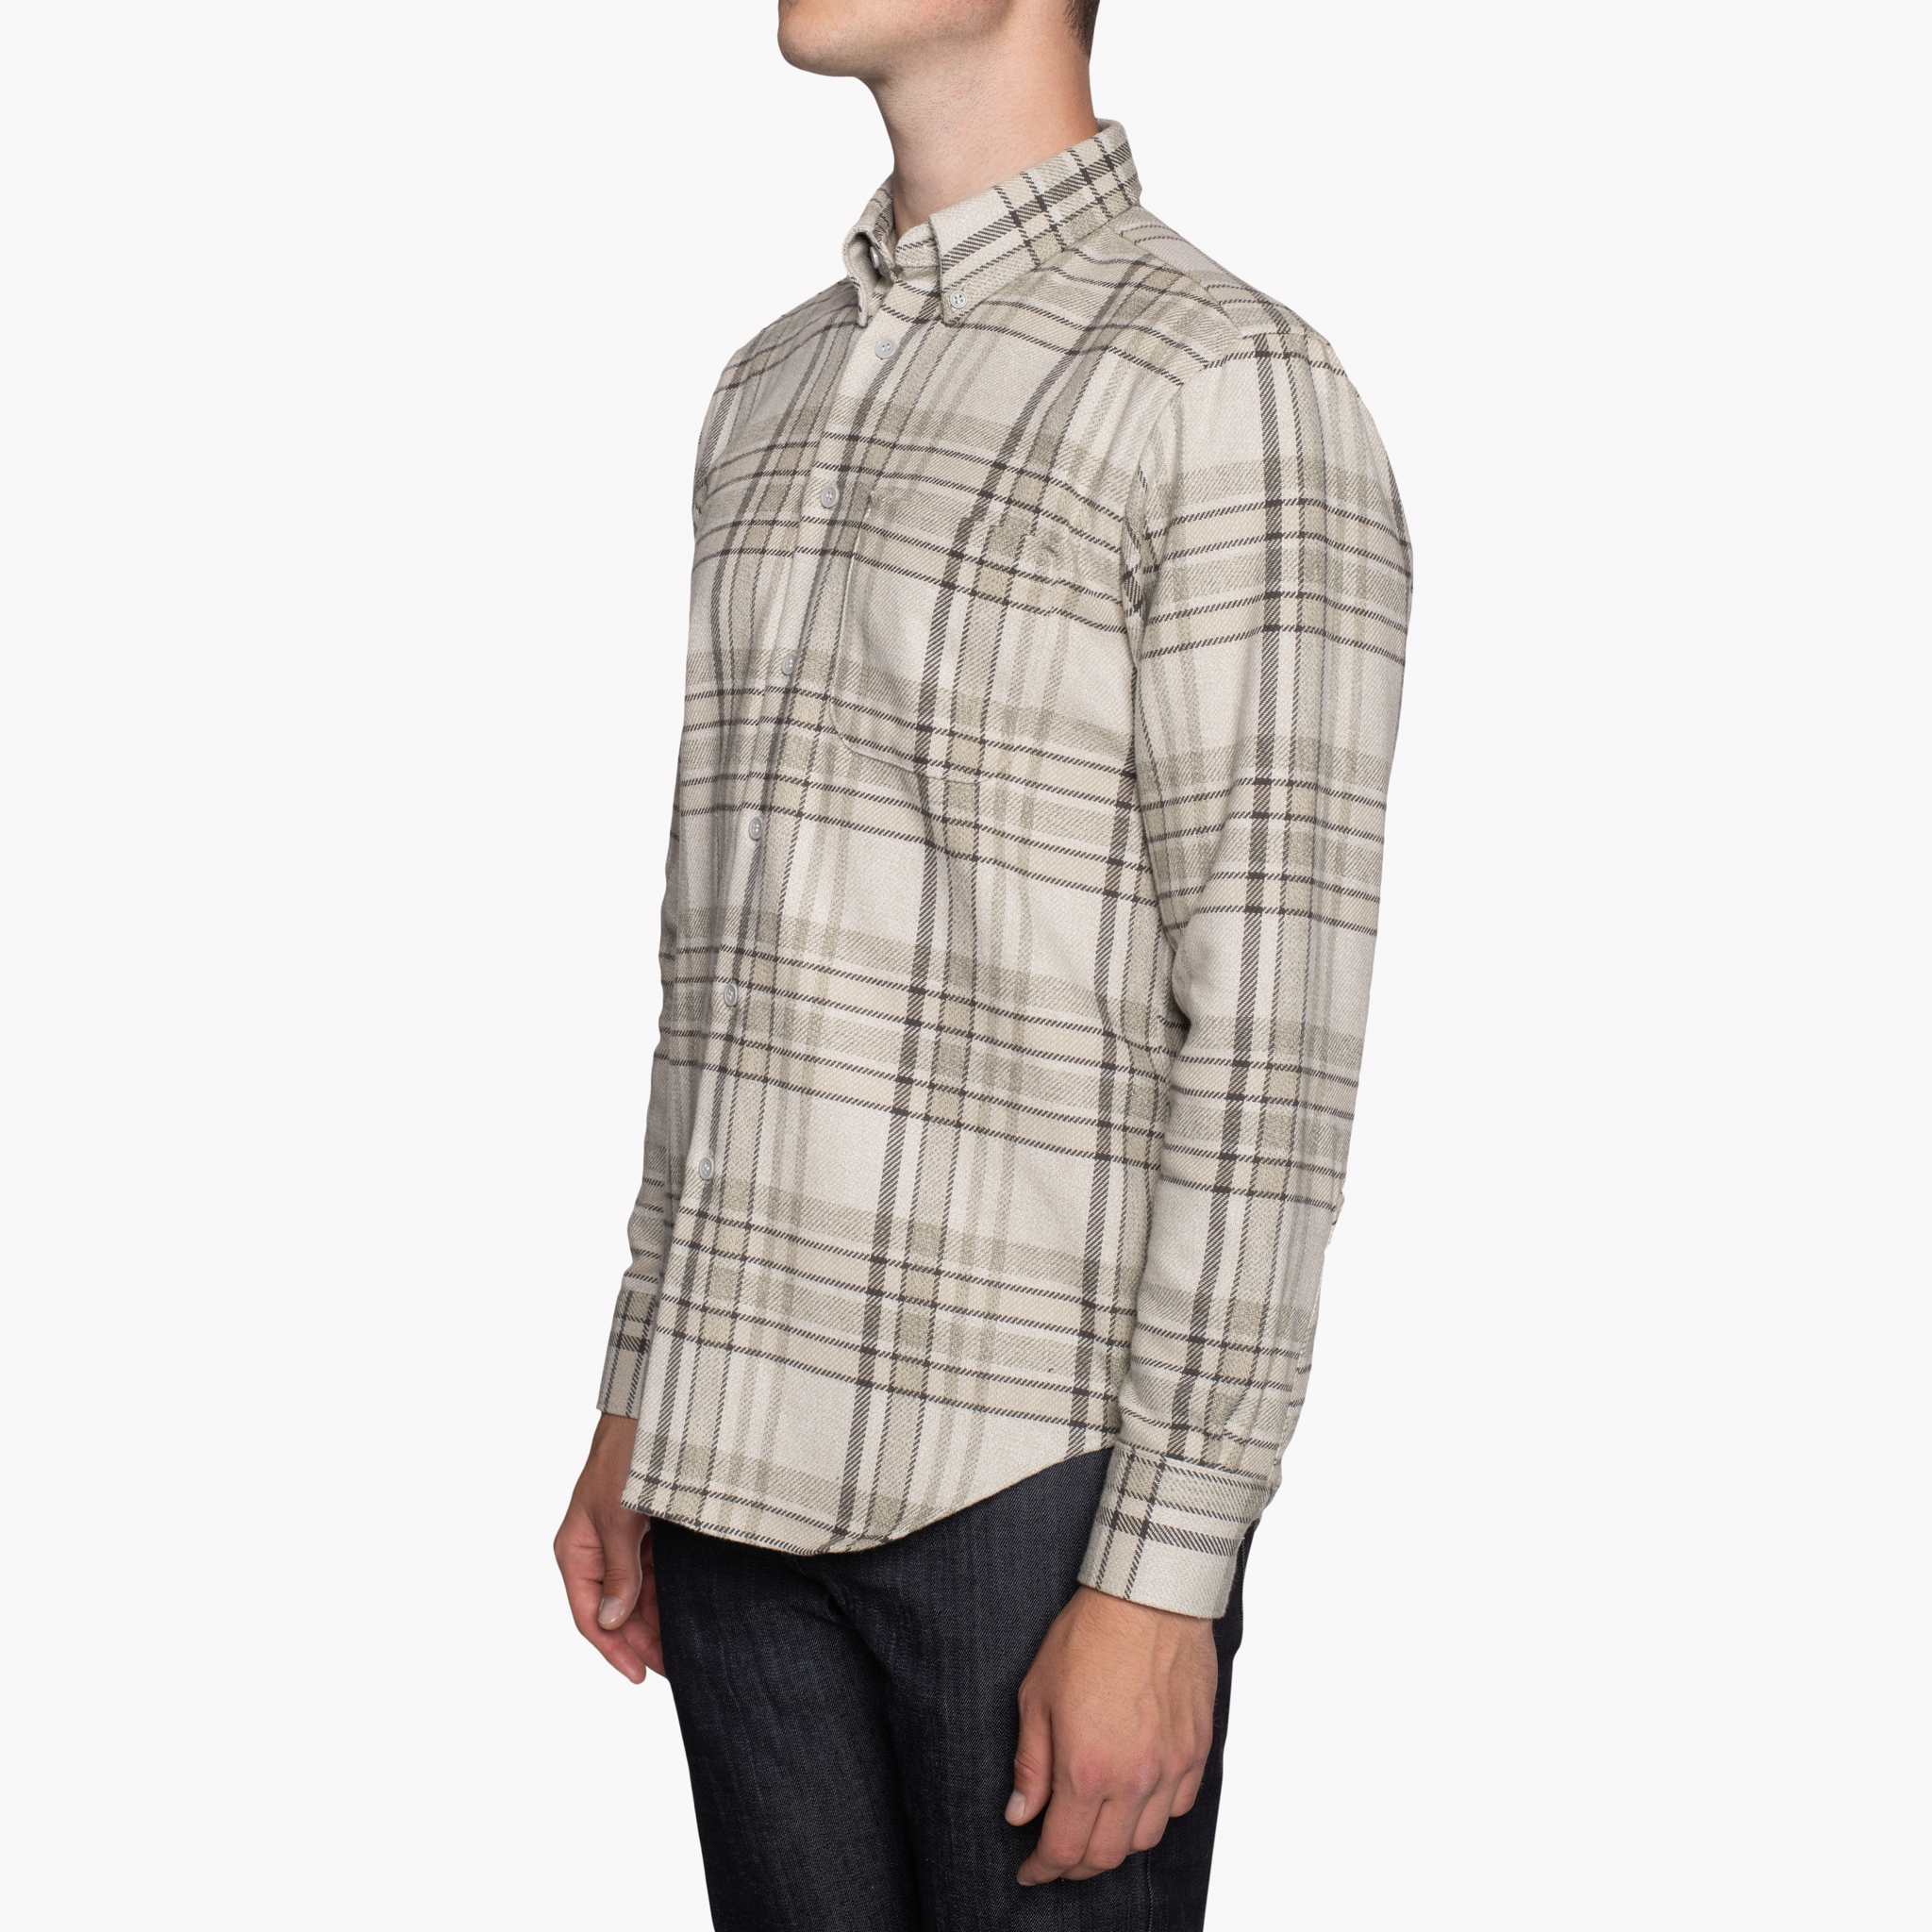  Easy Shirt - Heavy Vintage Flannel - Pale Grey - side 